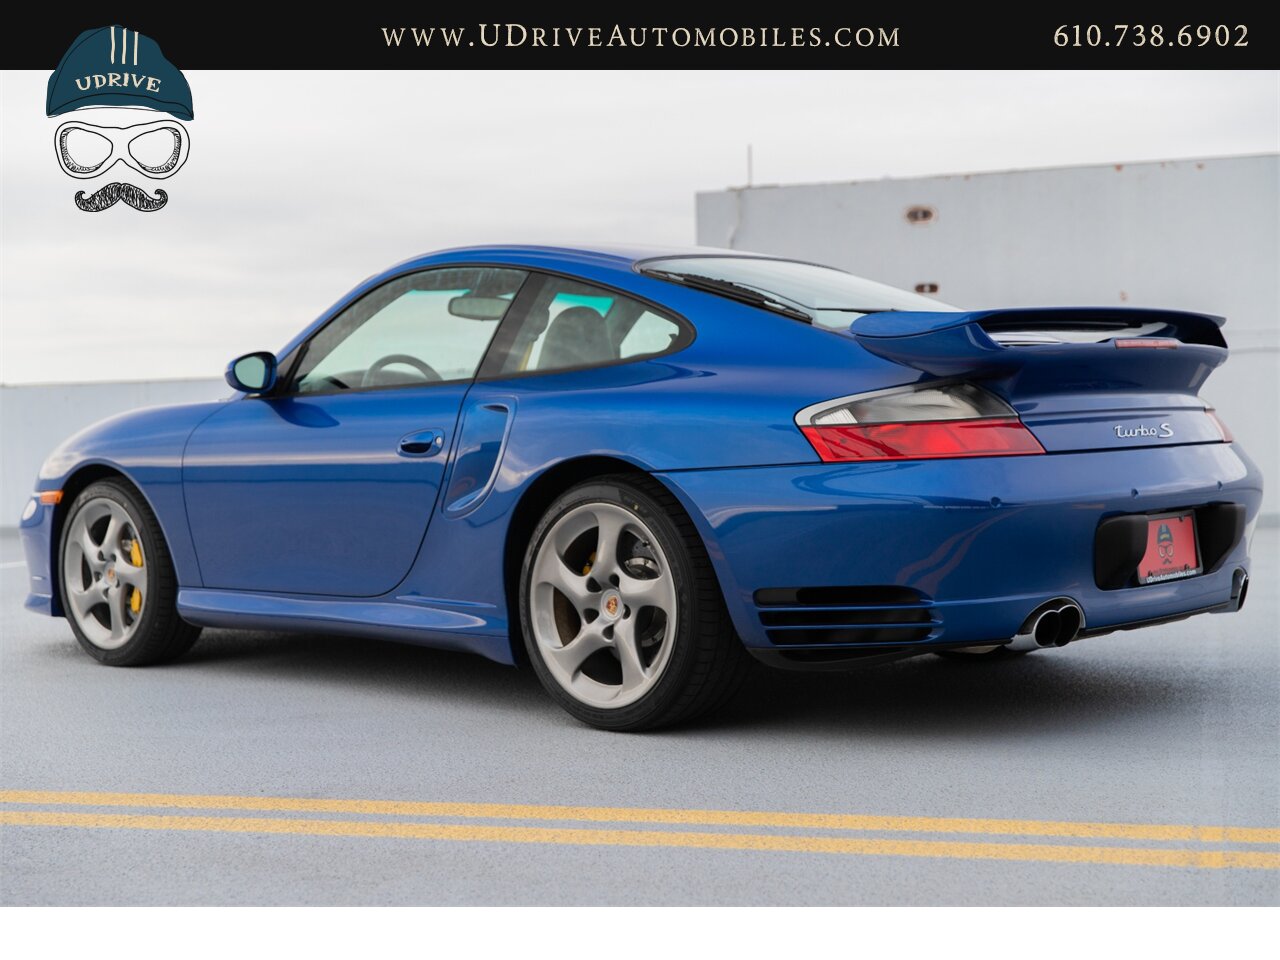 2005 Porsche 911 Turbo S Factory Aerokit Extremely Rare Cobalt Blue  Yellow Deviating Stitching 1 of a Kind Spec $160k MSRP - Photo 5 - West Chester, PA 19382